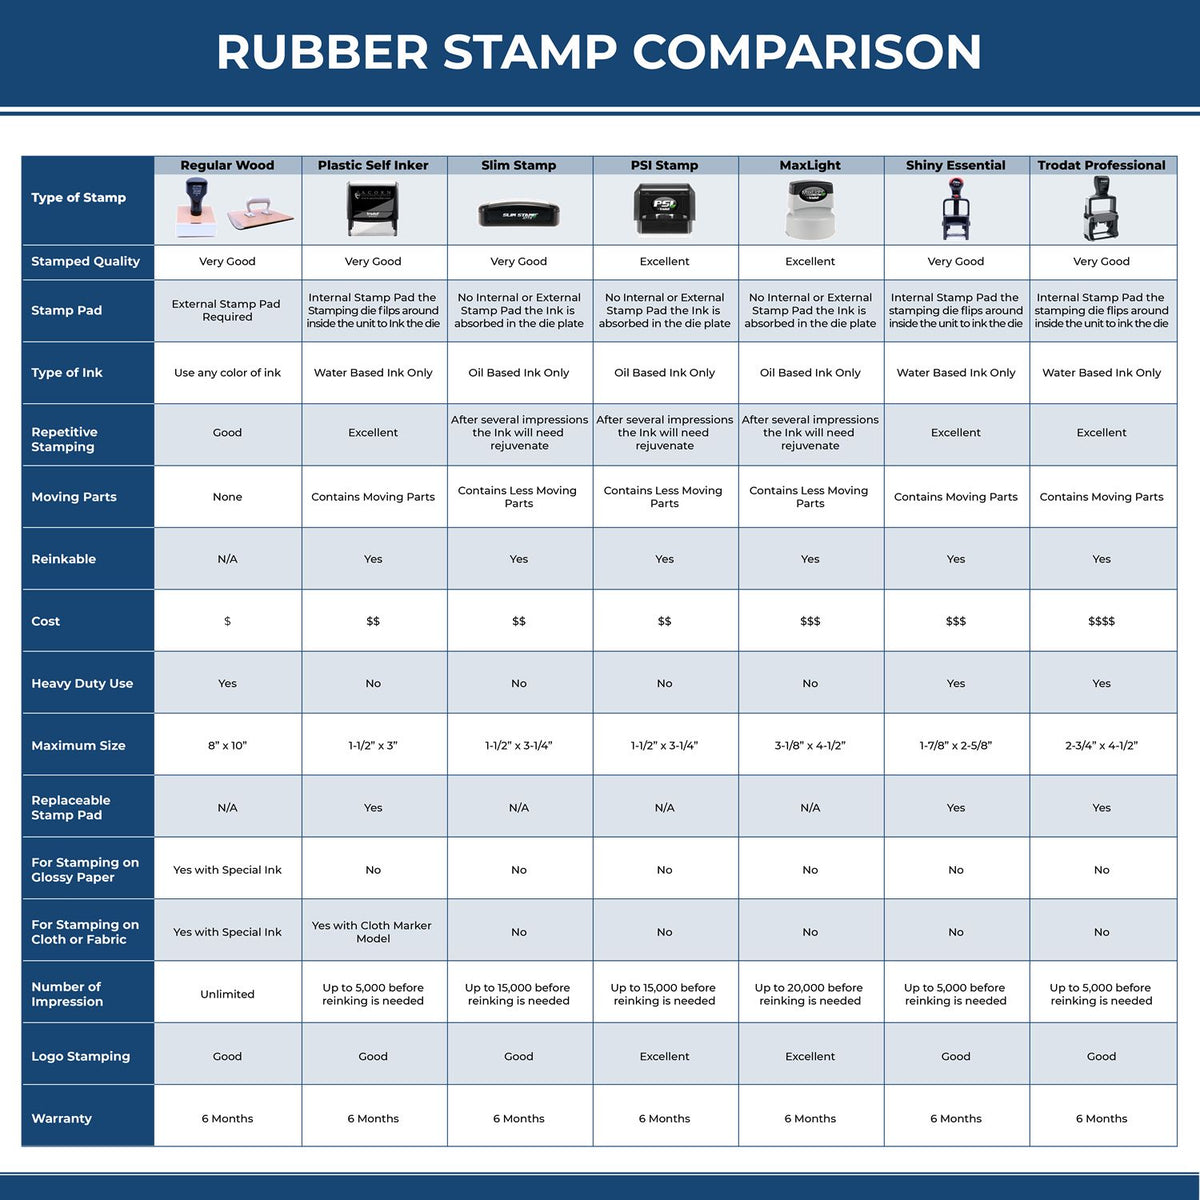 A comparison chart for the different types of mount models available for the Kansas Professional Engineer Seal Stamp.